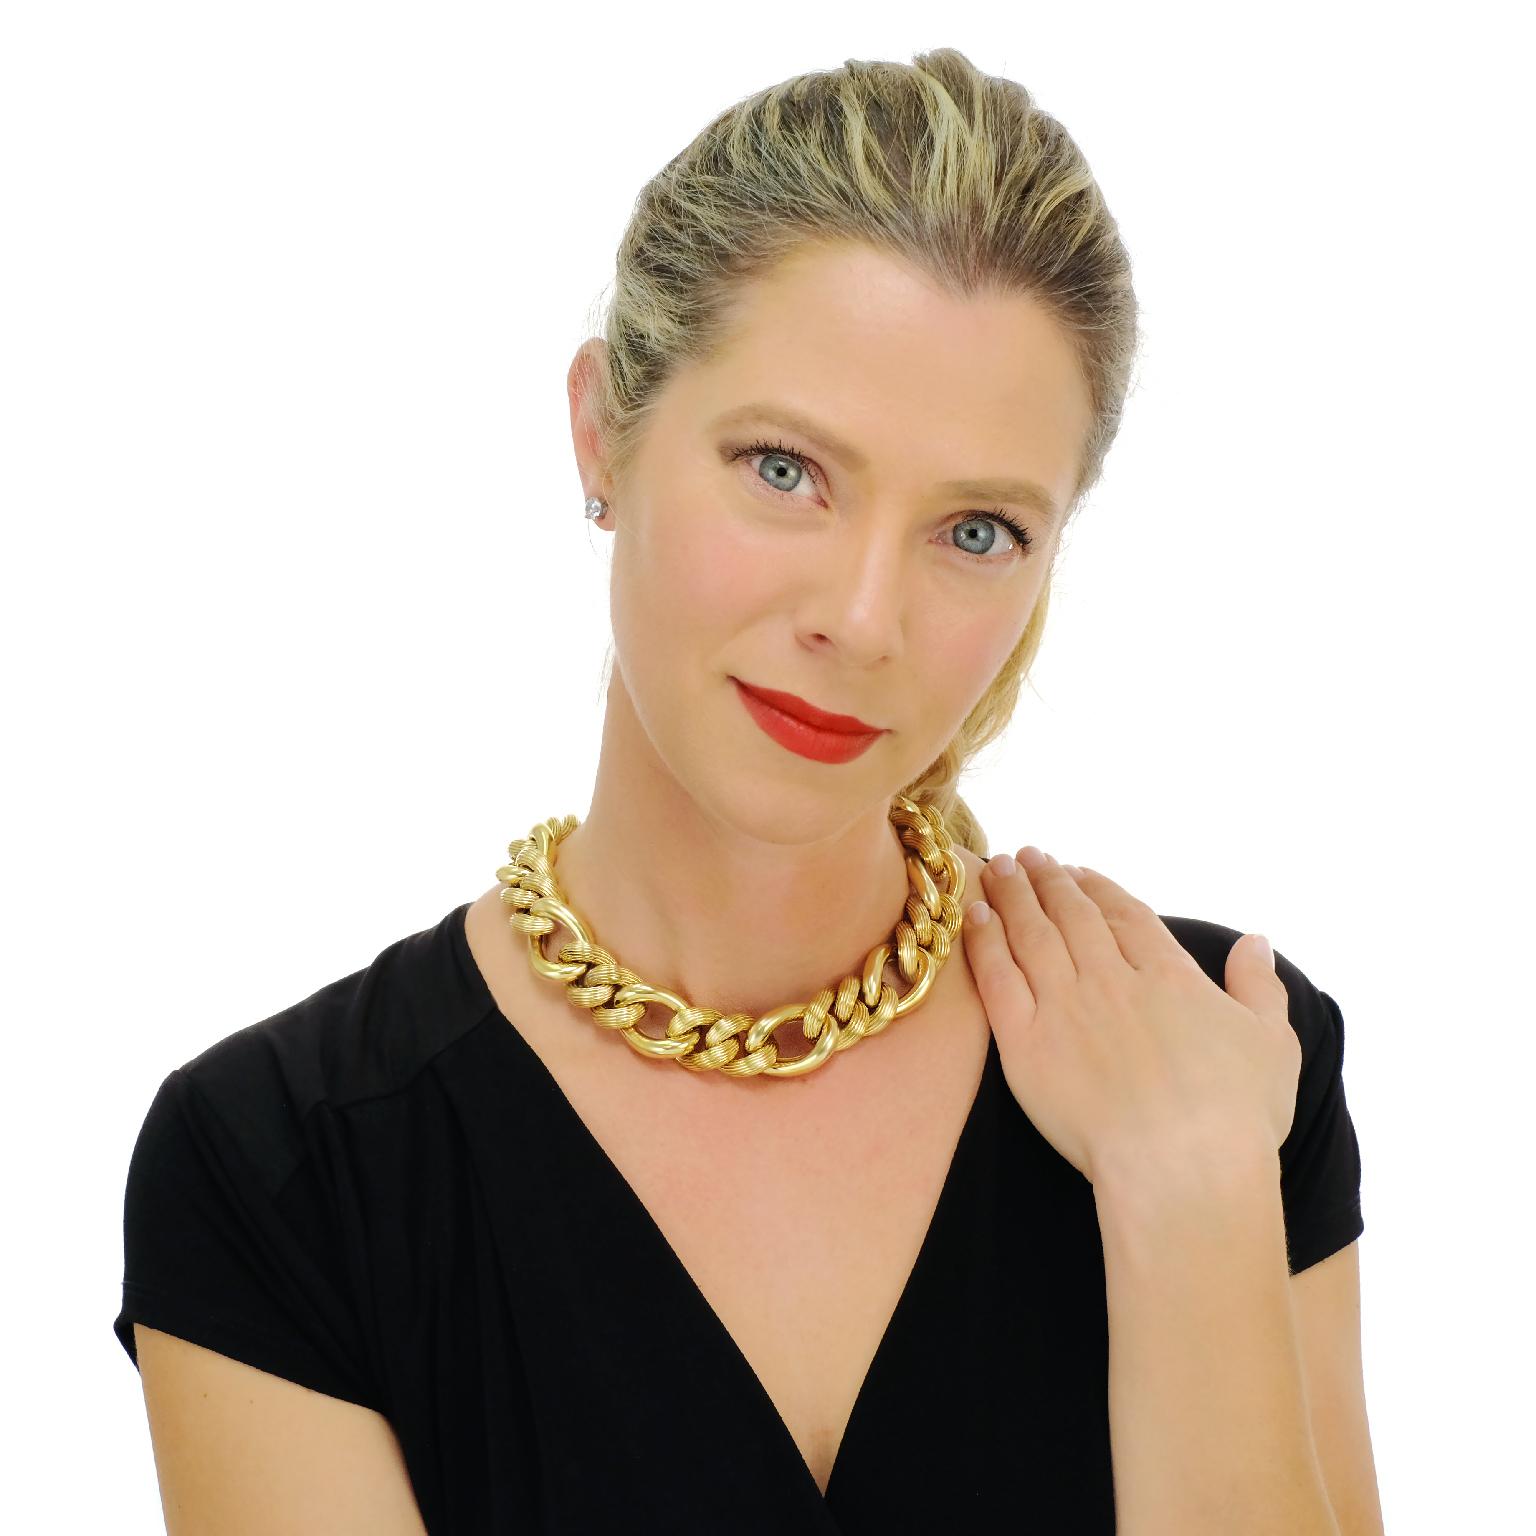 Circa 1960s, 14k, Italy.   This boldly elegant sixties necklace is the perfect signature accessory. The delightfully heavy links have a chic, chunky design underscored by an alternating polished and fluted finish. At 16 3/4s inches long, it is